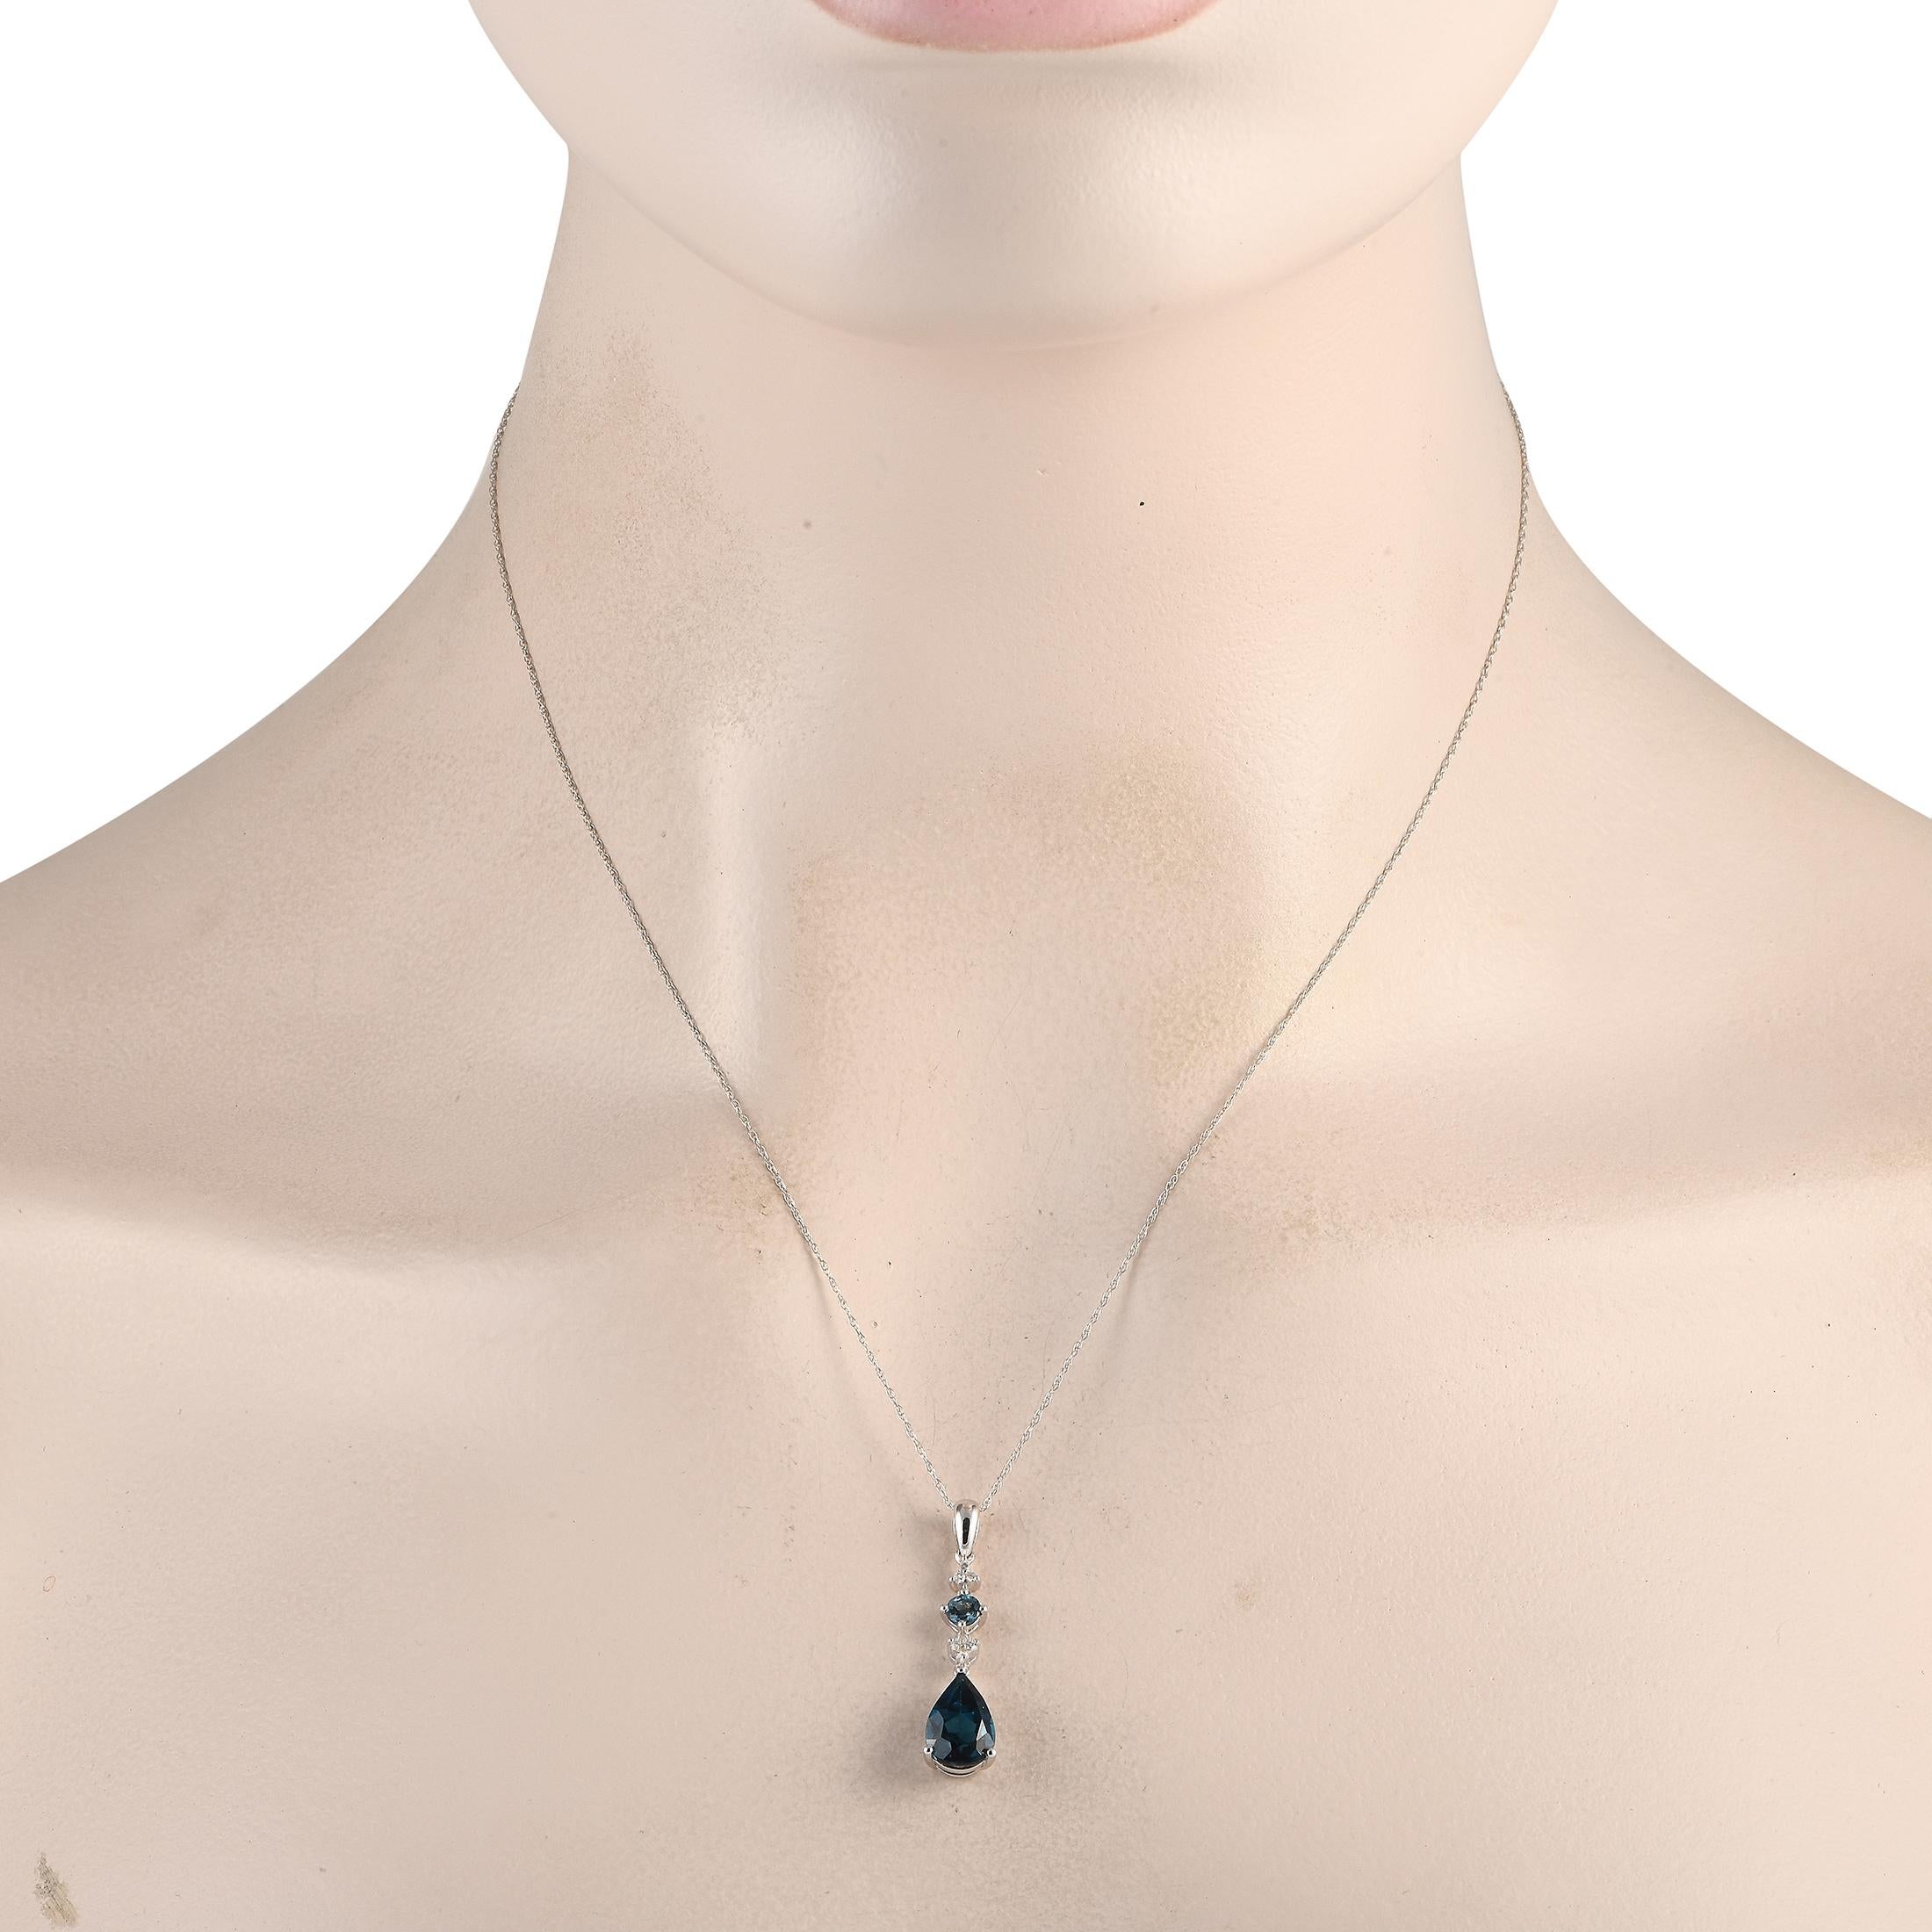 Deep blue Topaz gemstones serve as a stunning focal point on this incredibly chic necklace. Suspended from an 18 chain, youll find a dynamic pendant that comes to life thanks to sparkling diamonds totaling 0.05 carats. The pendant is crafted from